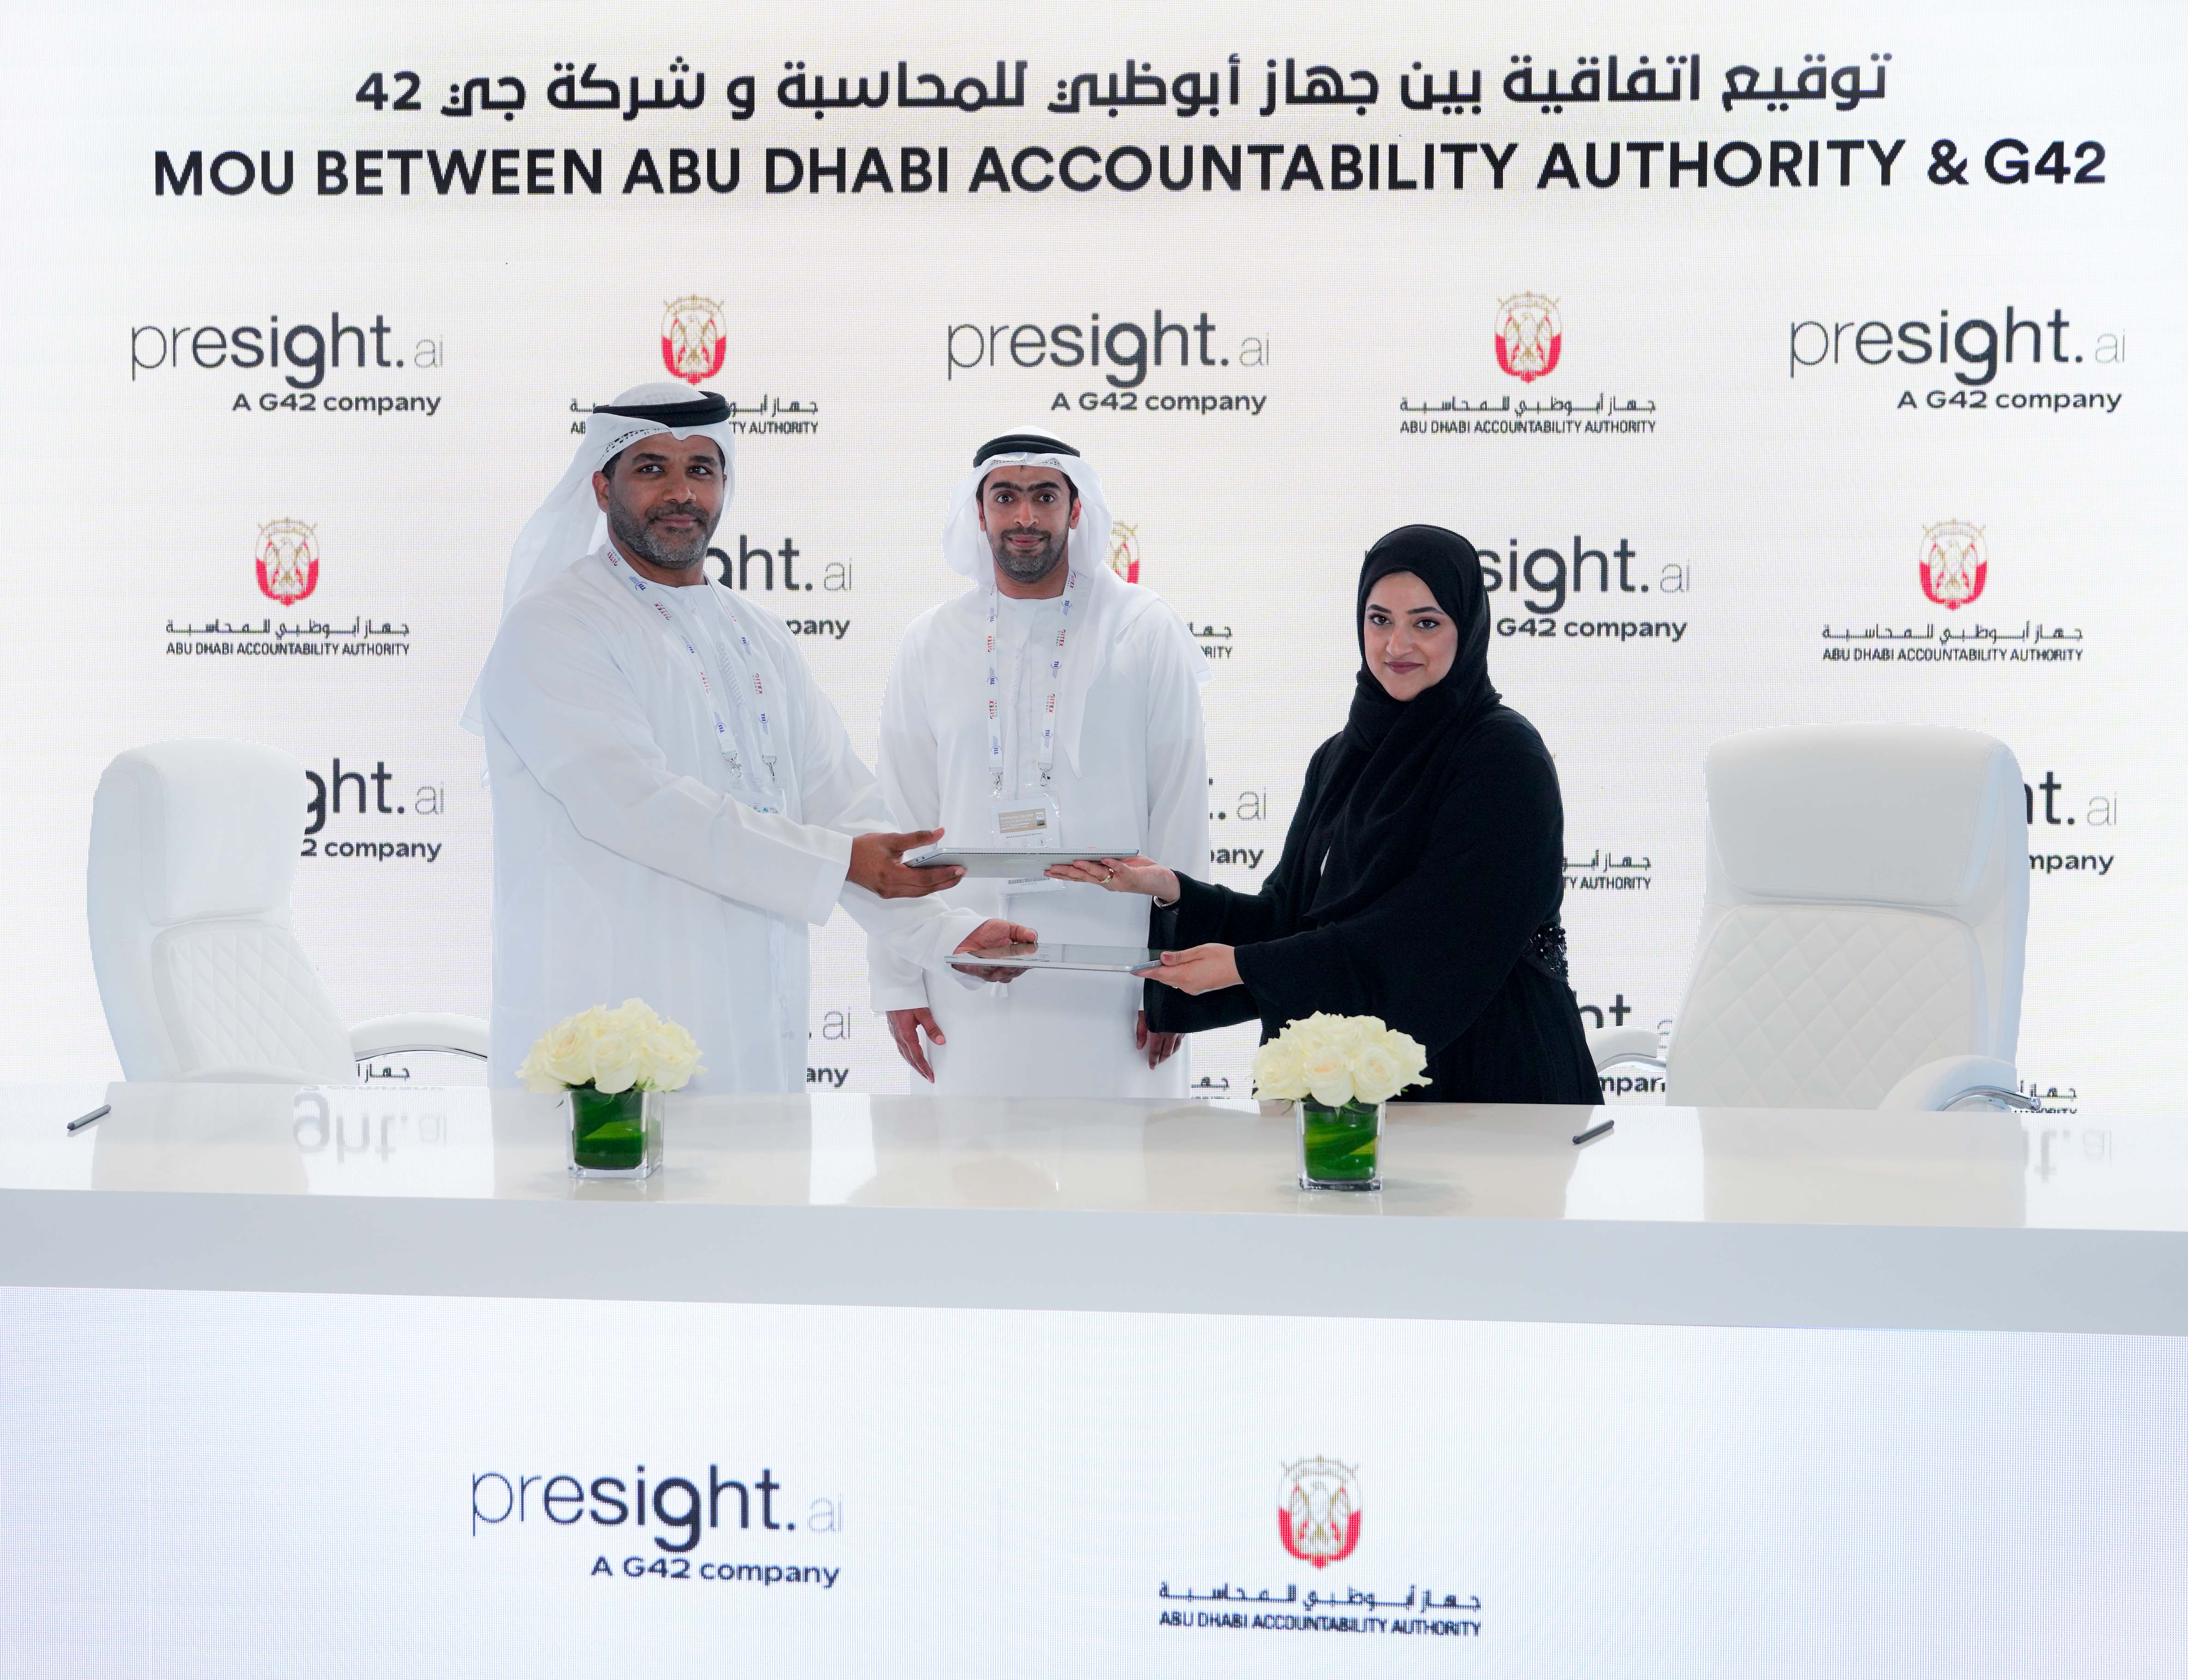 Abu Dhabi Accountability Authority signs MoU with G42 subsidiary during GITEX participation